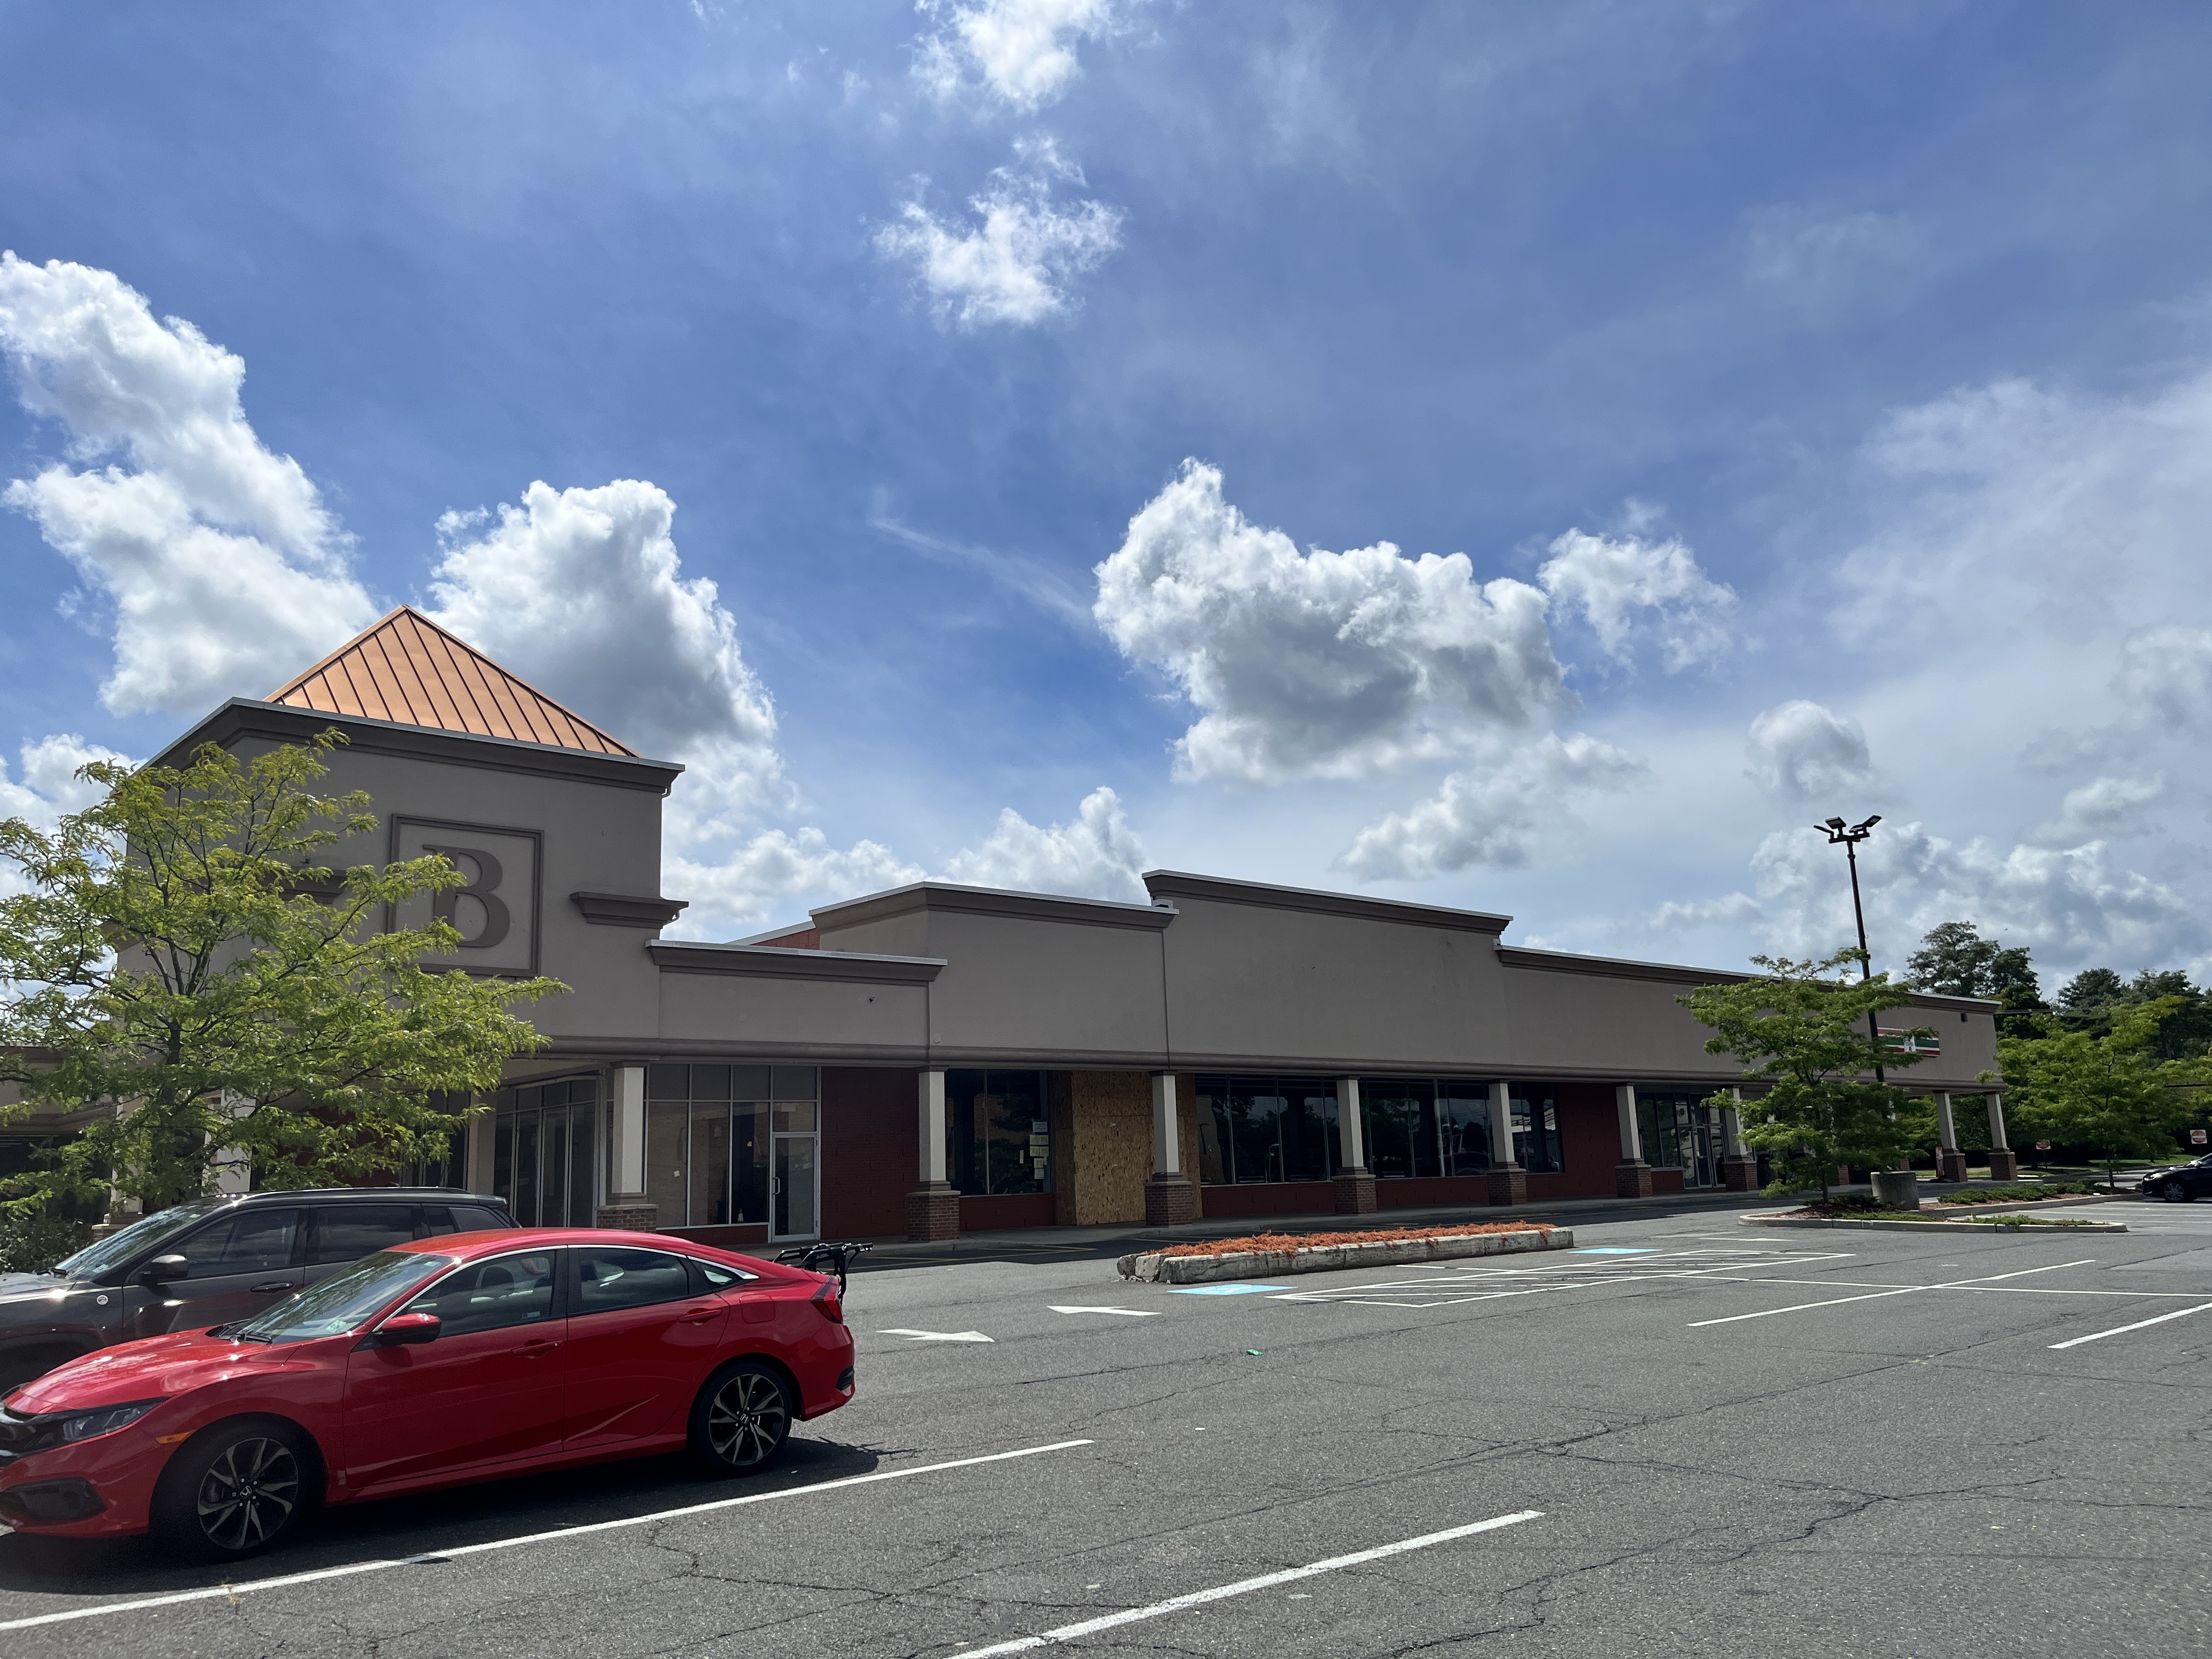 New Stores, Expansion at Lenox Square; Dutch Retailer Coming to